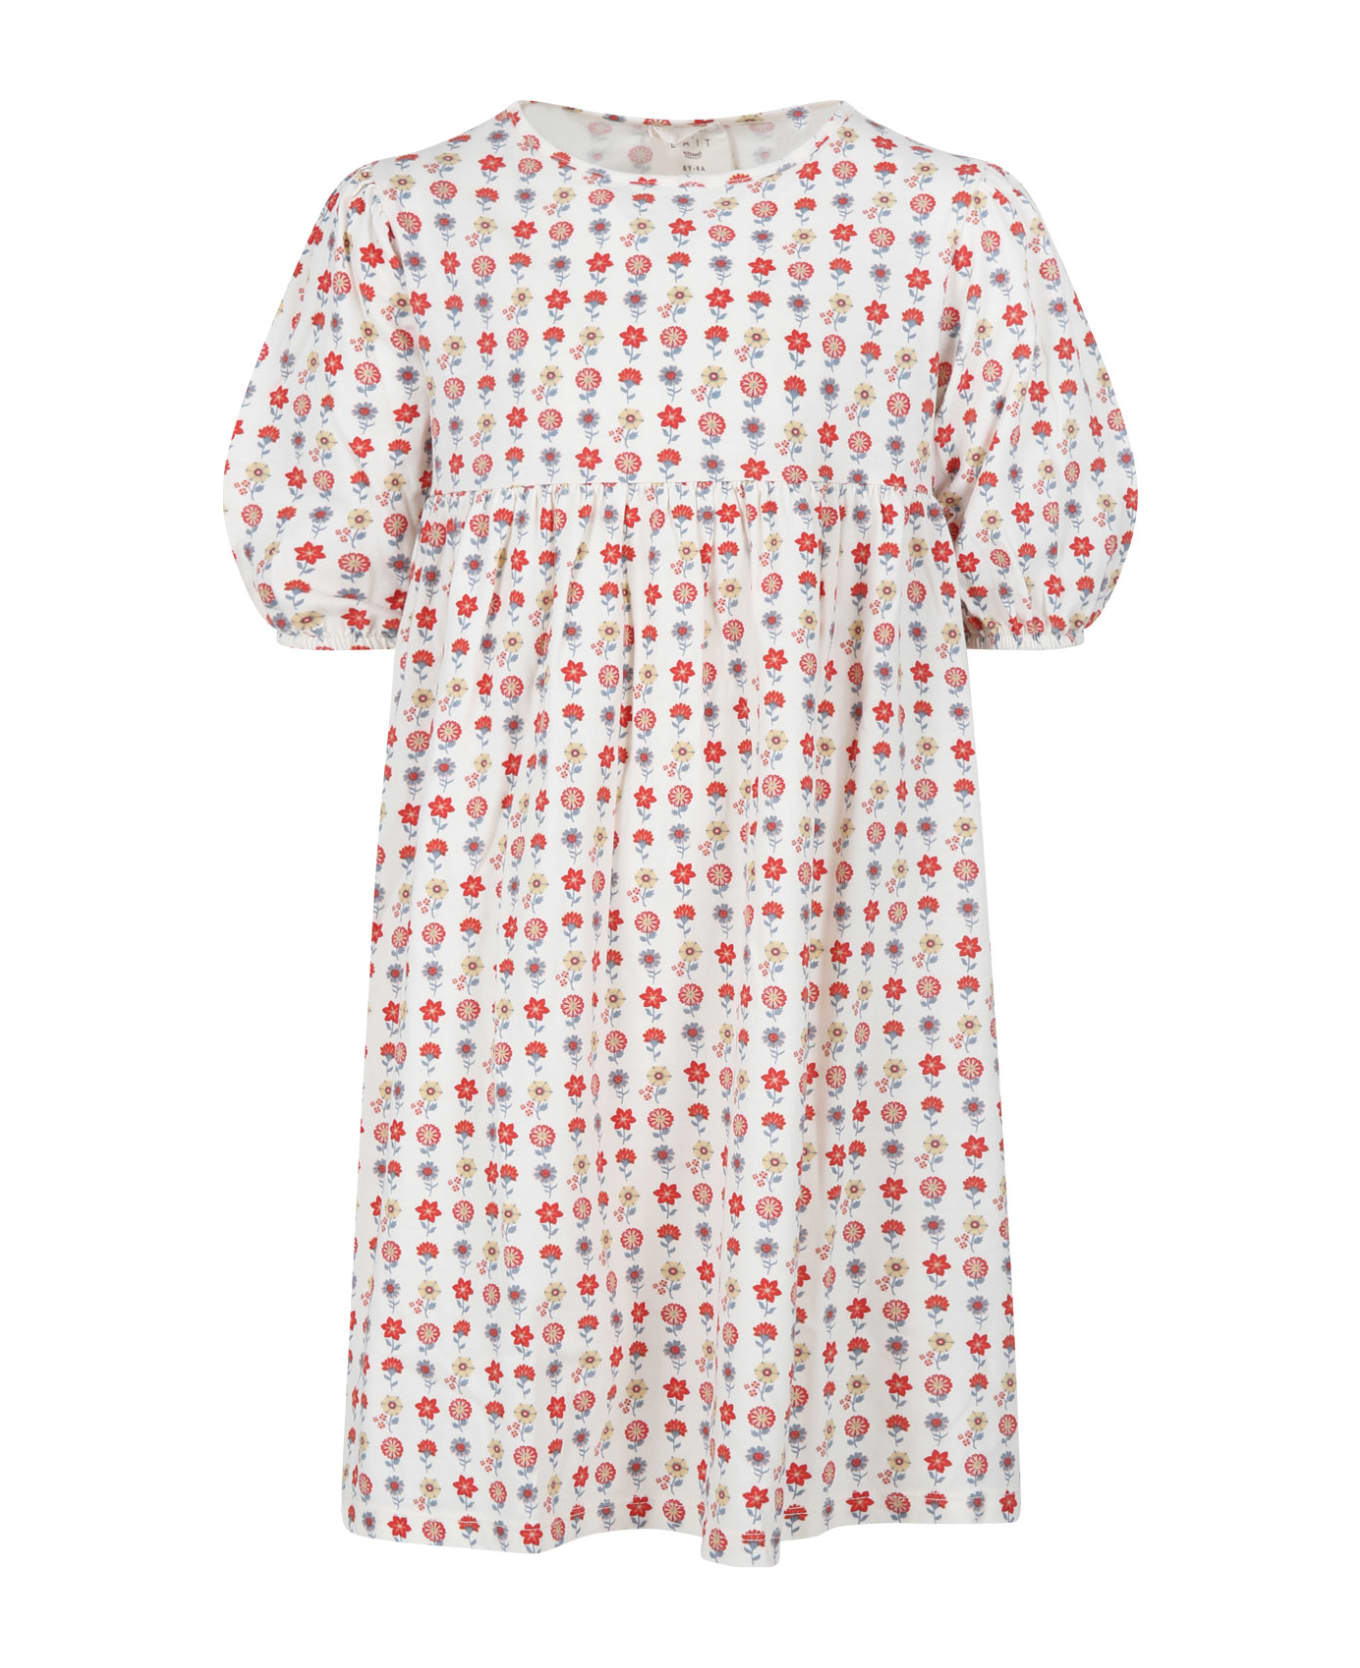 Coco Au Lait Ivory Dress For Girl With Flowers Print - Ivory ワンピース＆ドレス